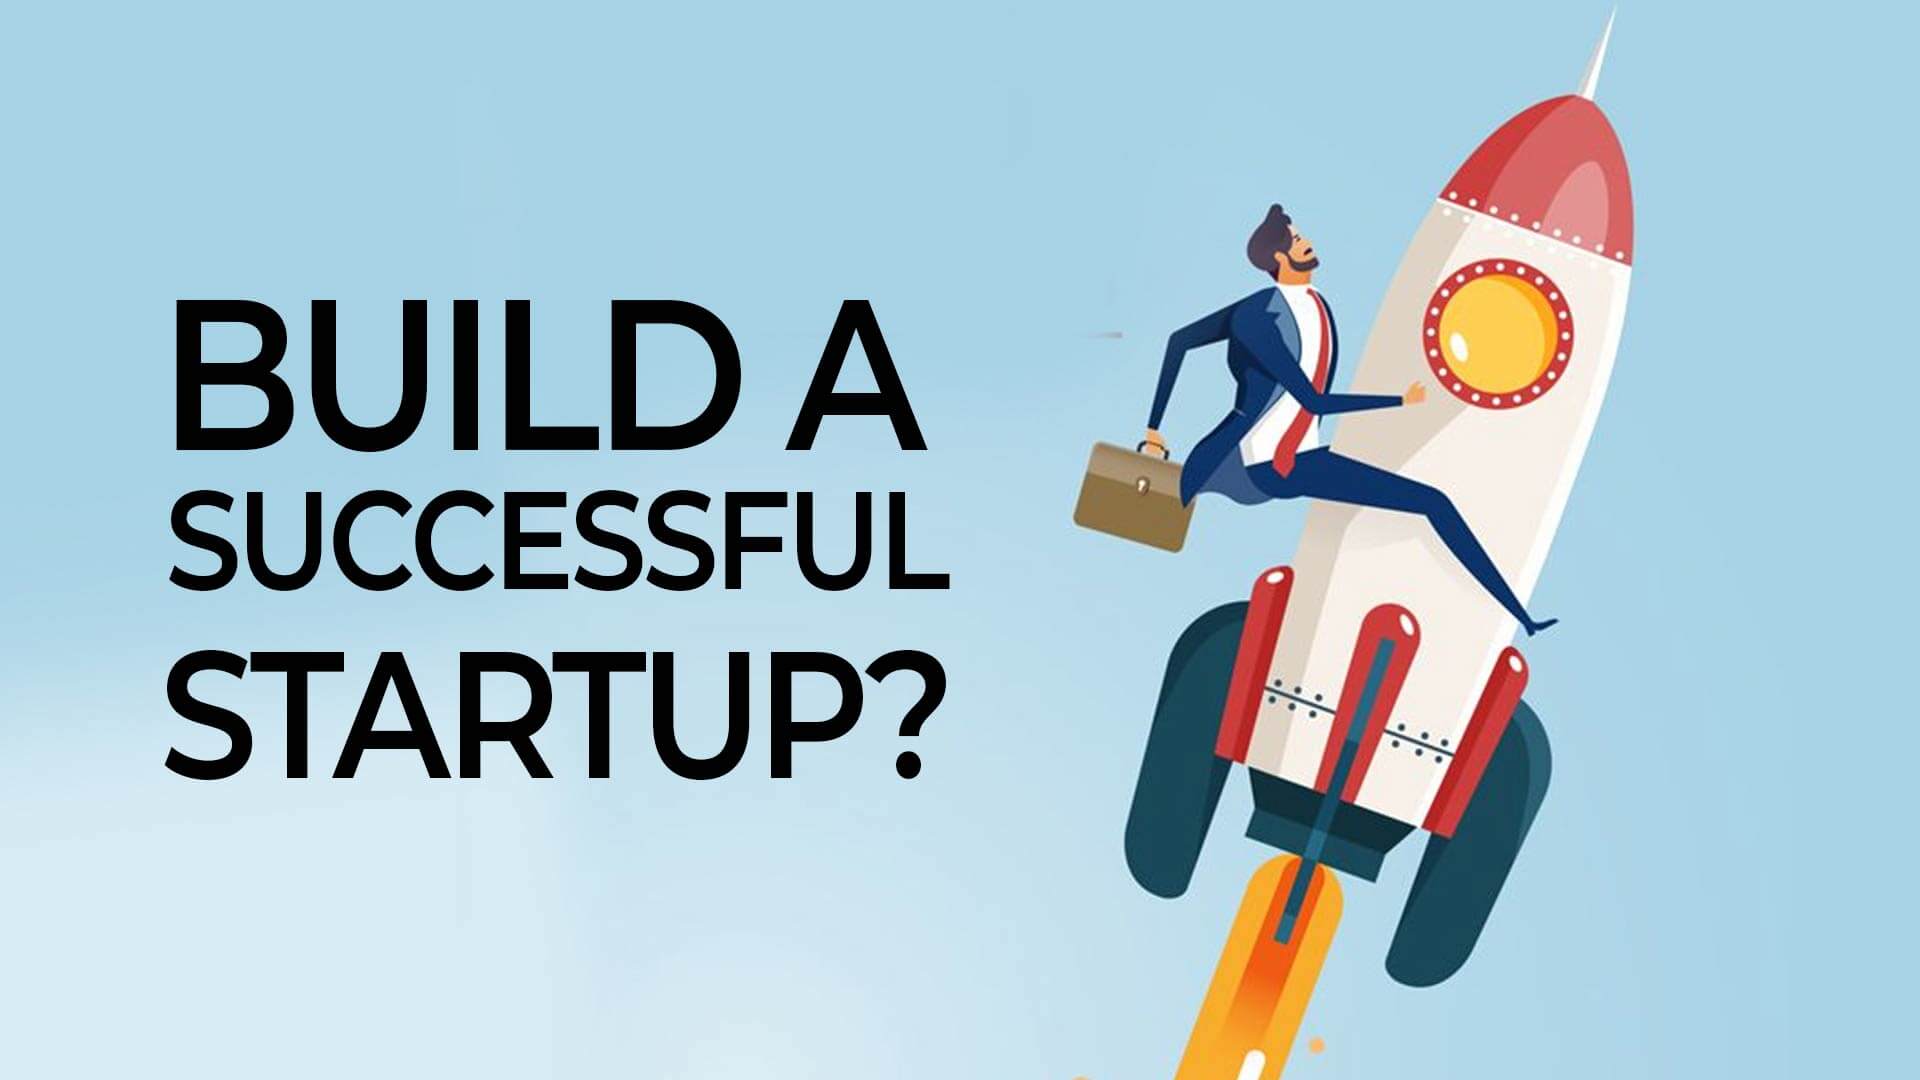 How to Build a Successful Startup from Scratch